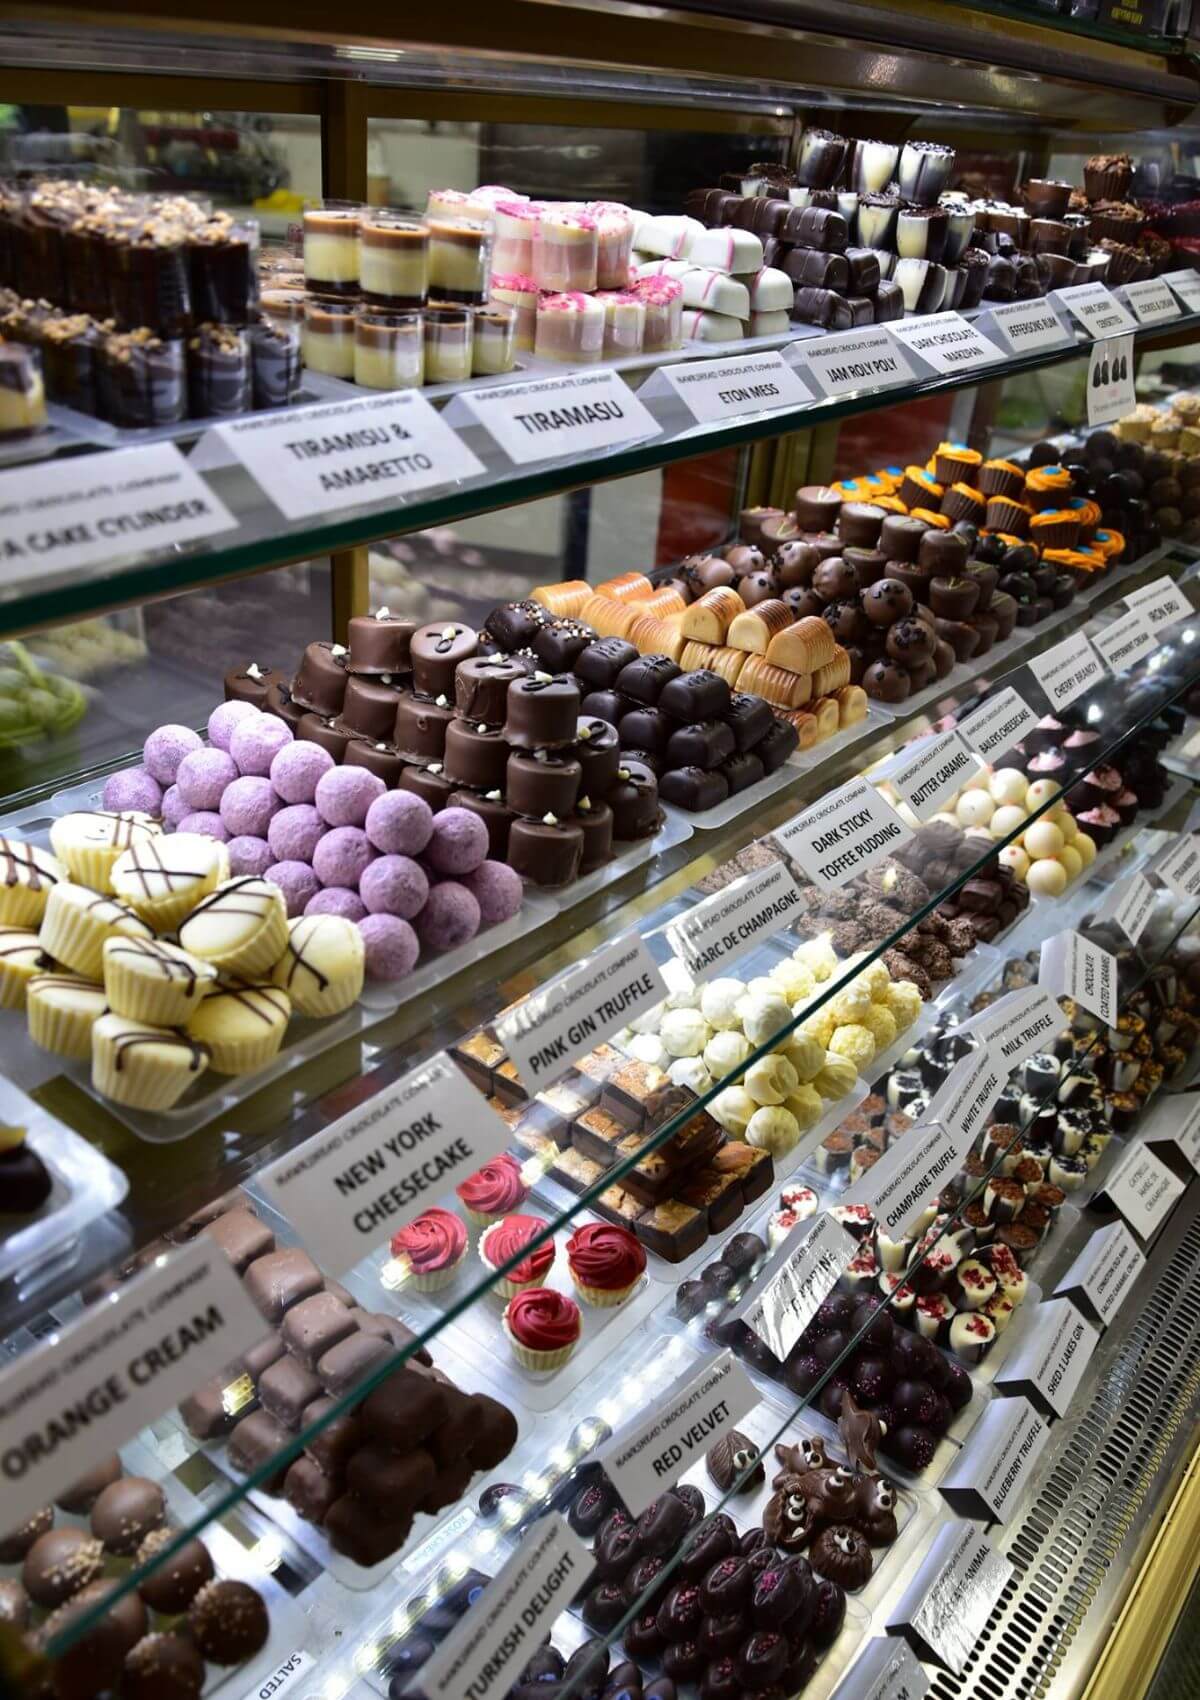 Winter is the perfect time to visit the Chocolate Factory in the Lake District